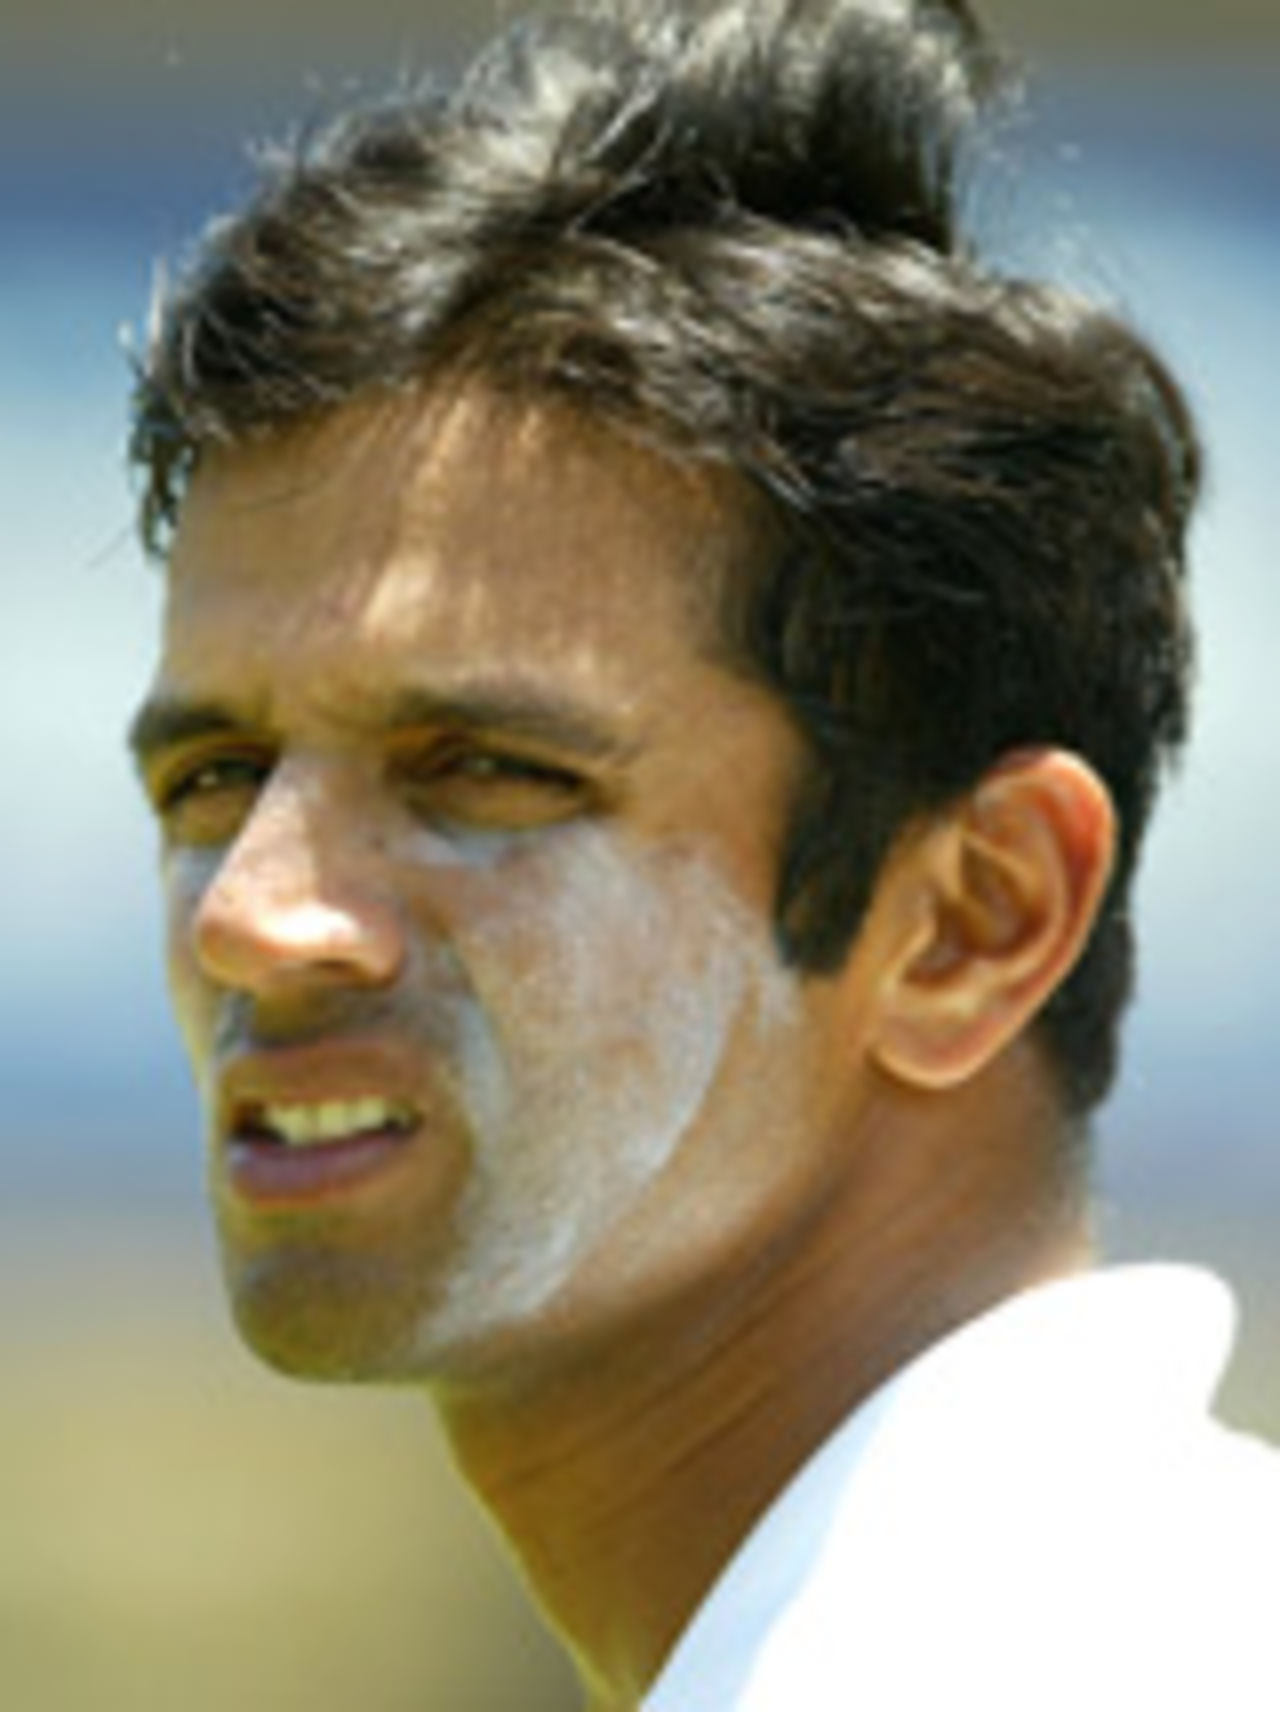 Rahul Dravid, cream on face, at nets a day before the final Test, 1st January 2004, 4th Test, Sydney